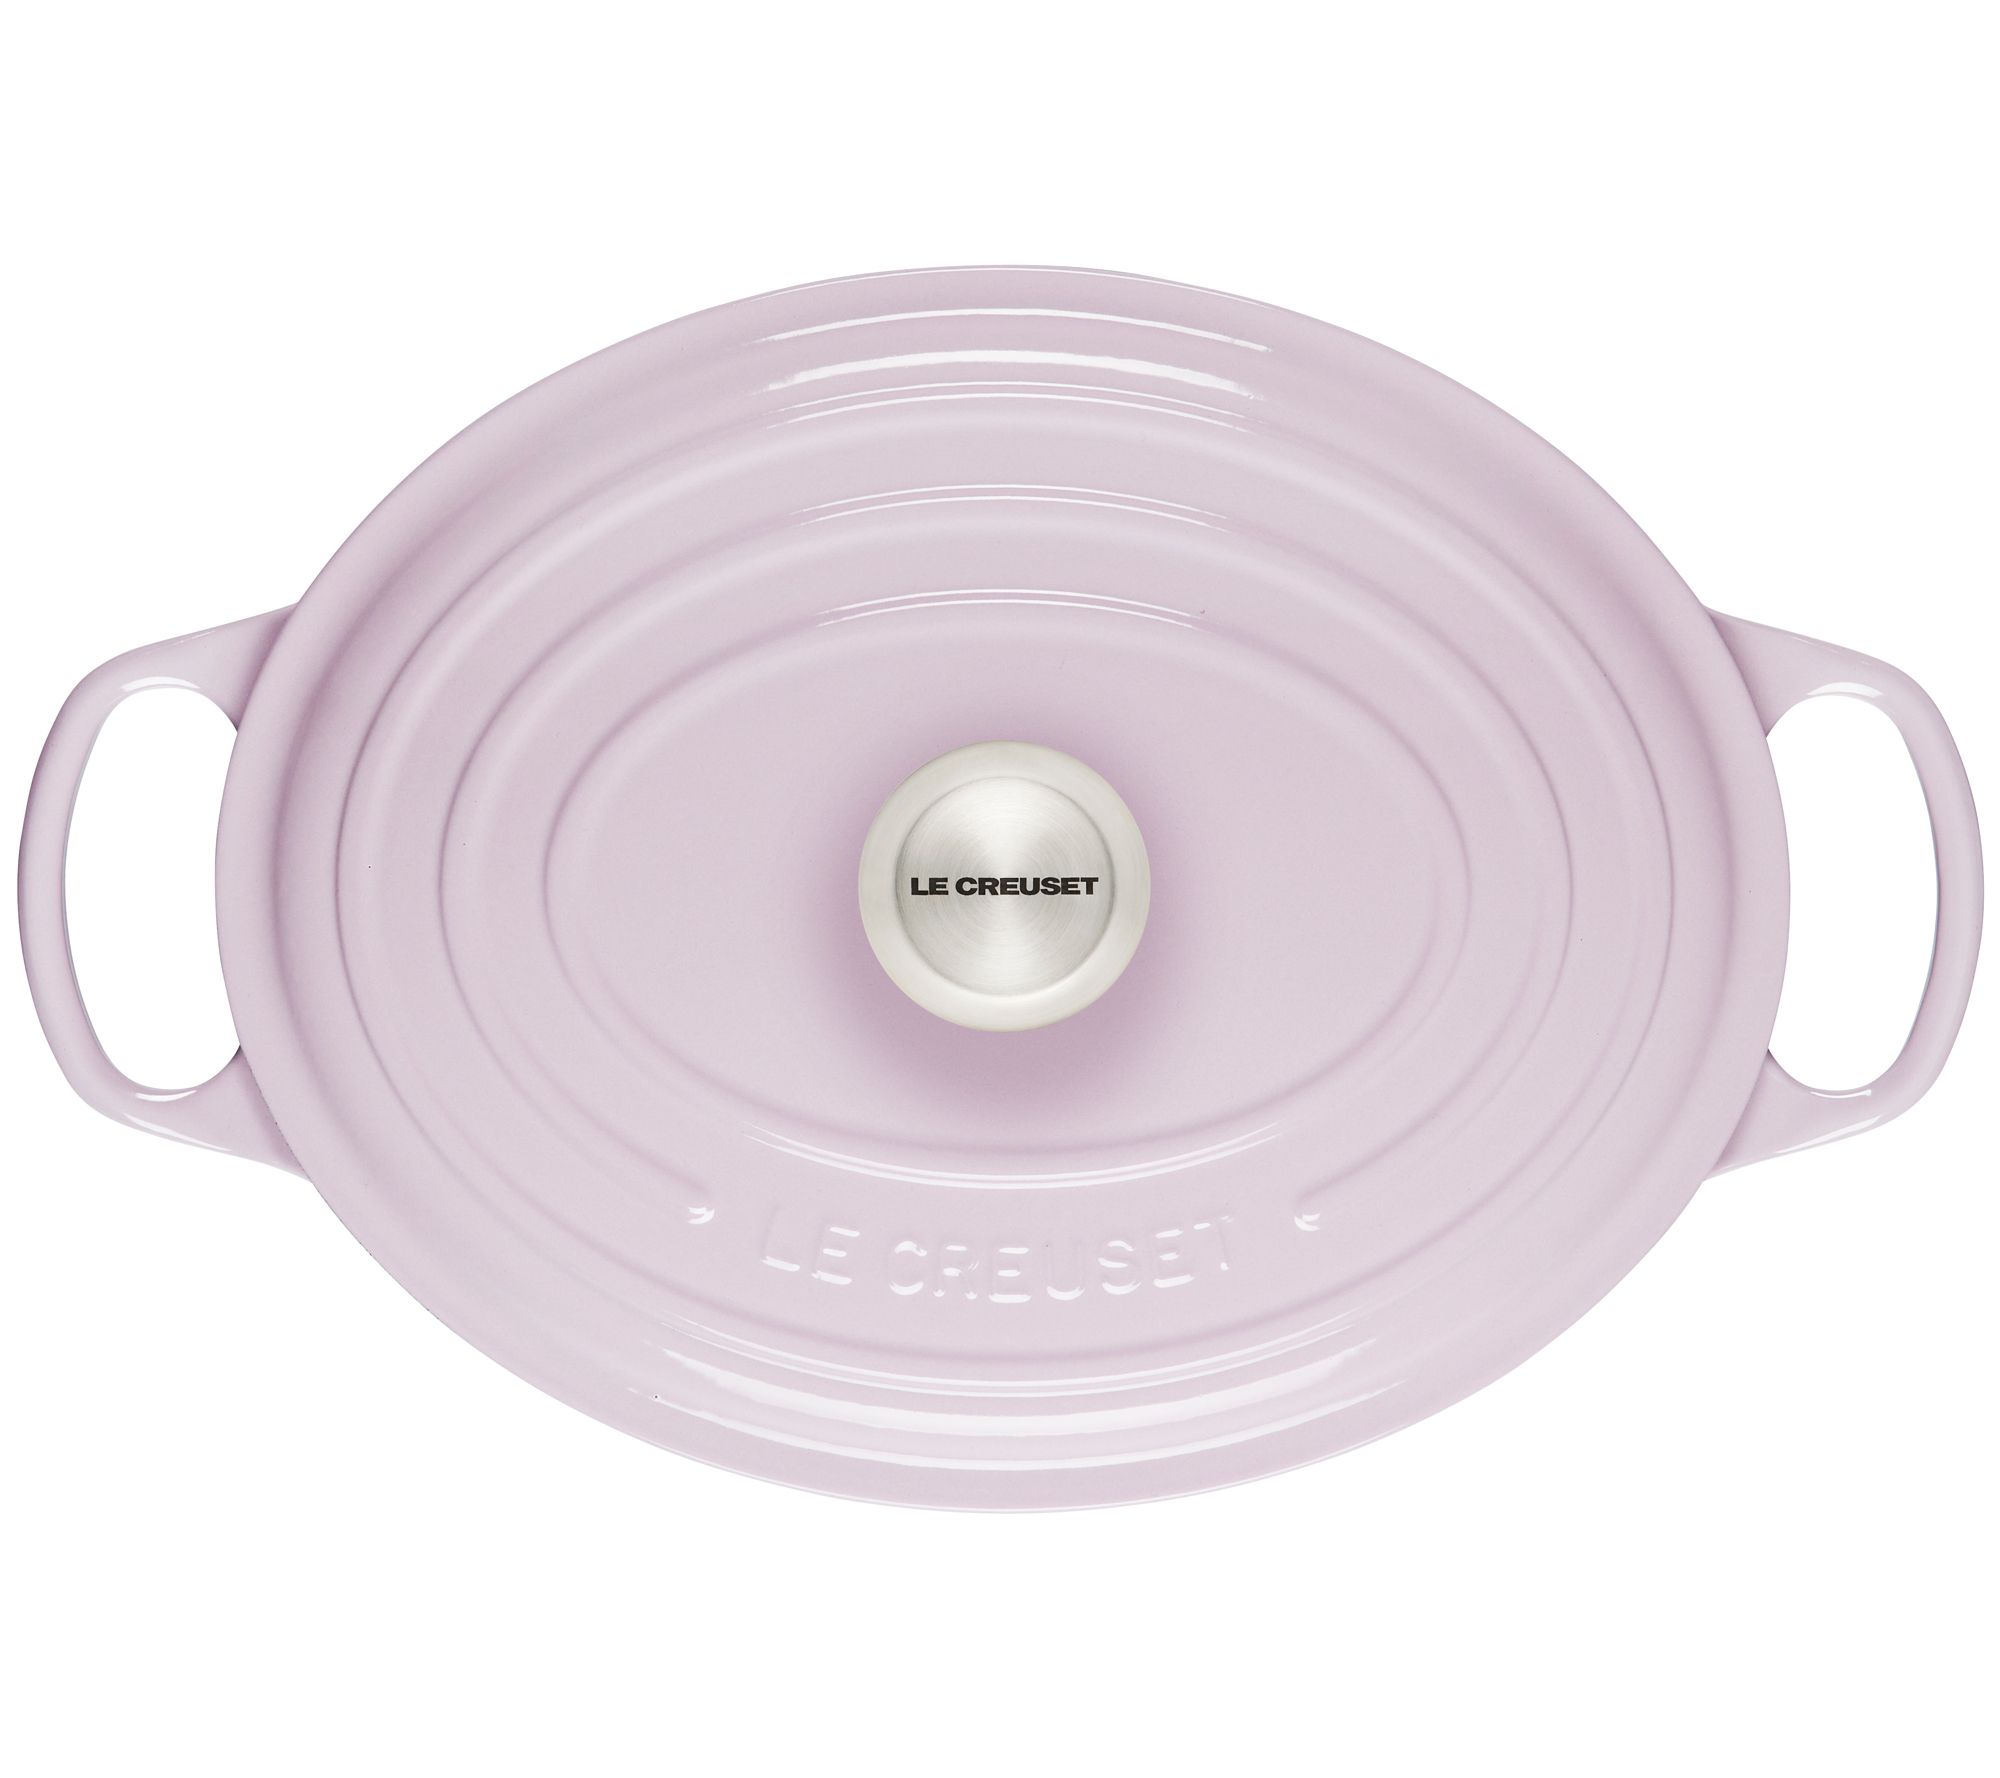 All-Clad Tri-Ply 5.5 Qt Dutch Oven with Oven Mitts on QVC 